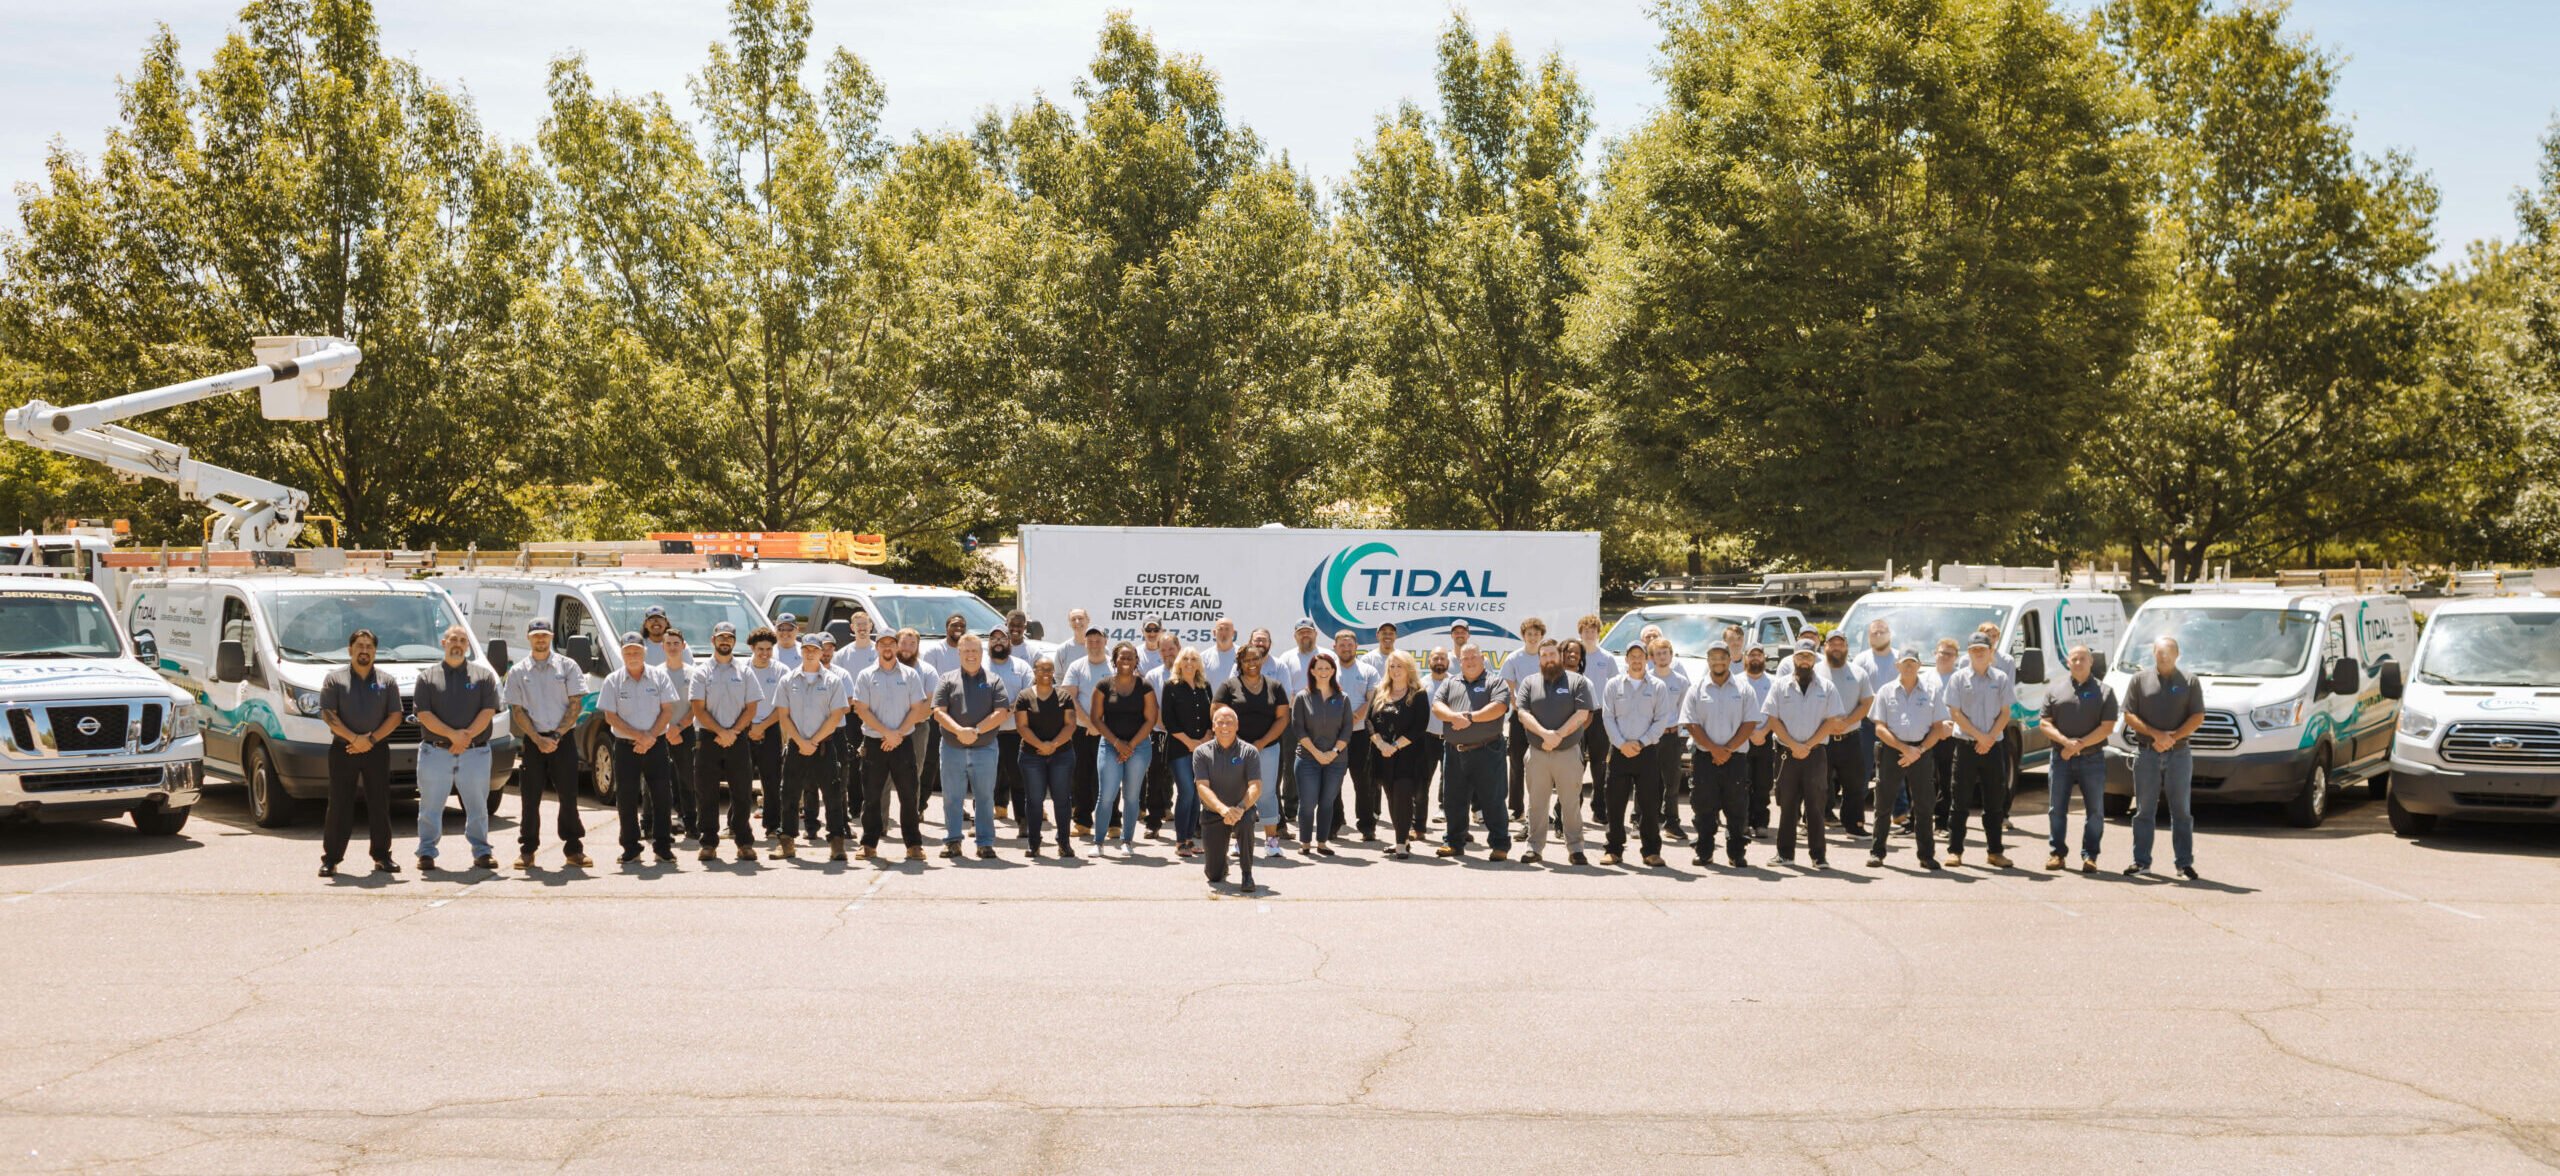 CONTACT TIDAL ELECTRICAL SERVICES TODAY